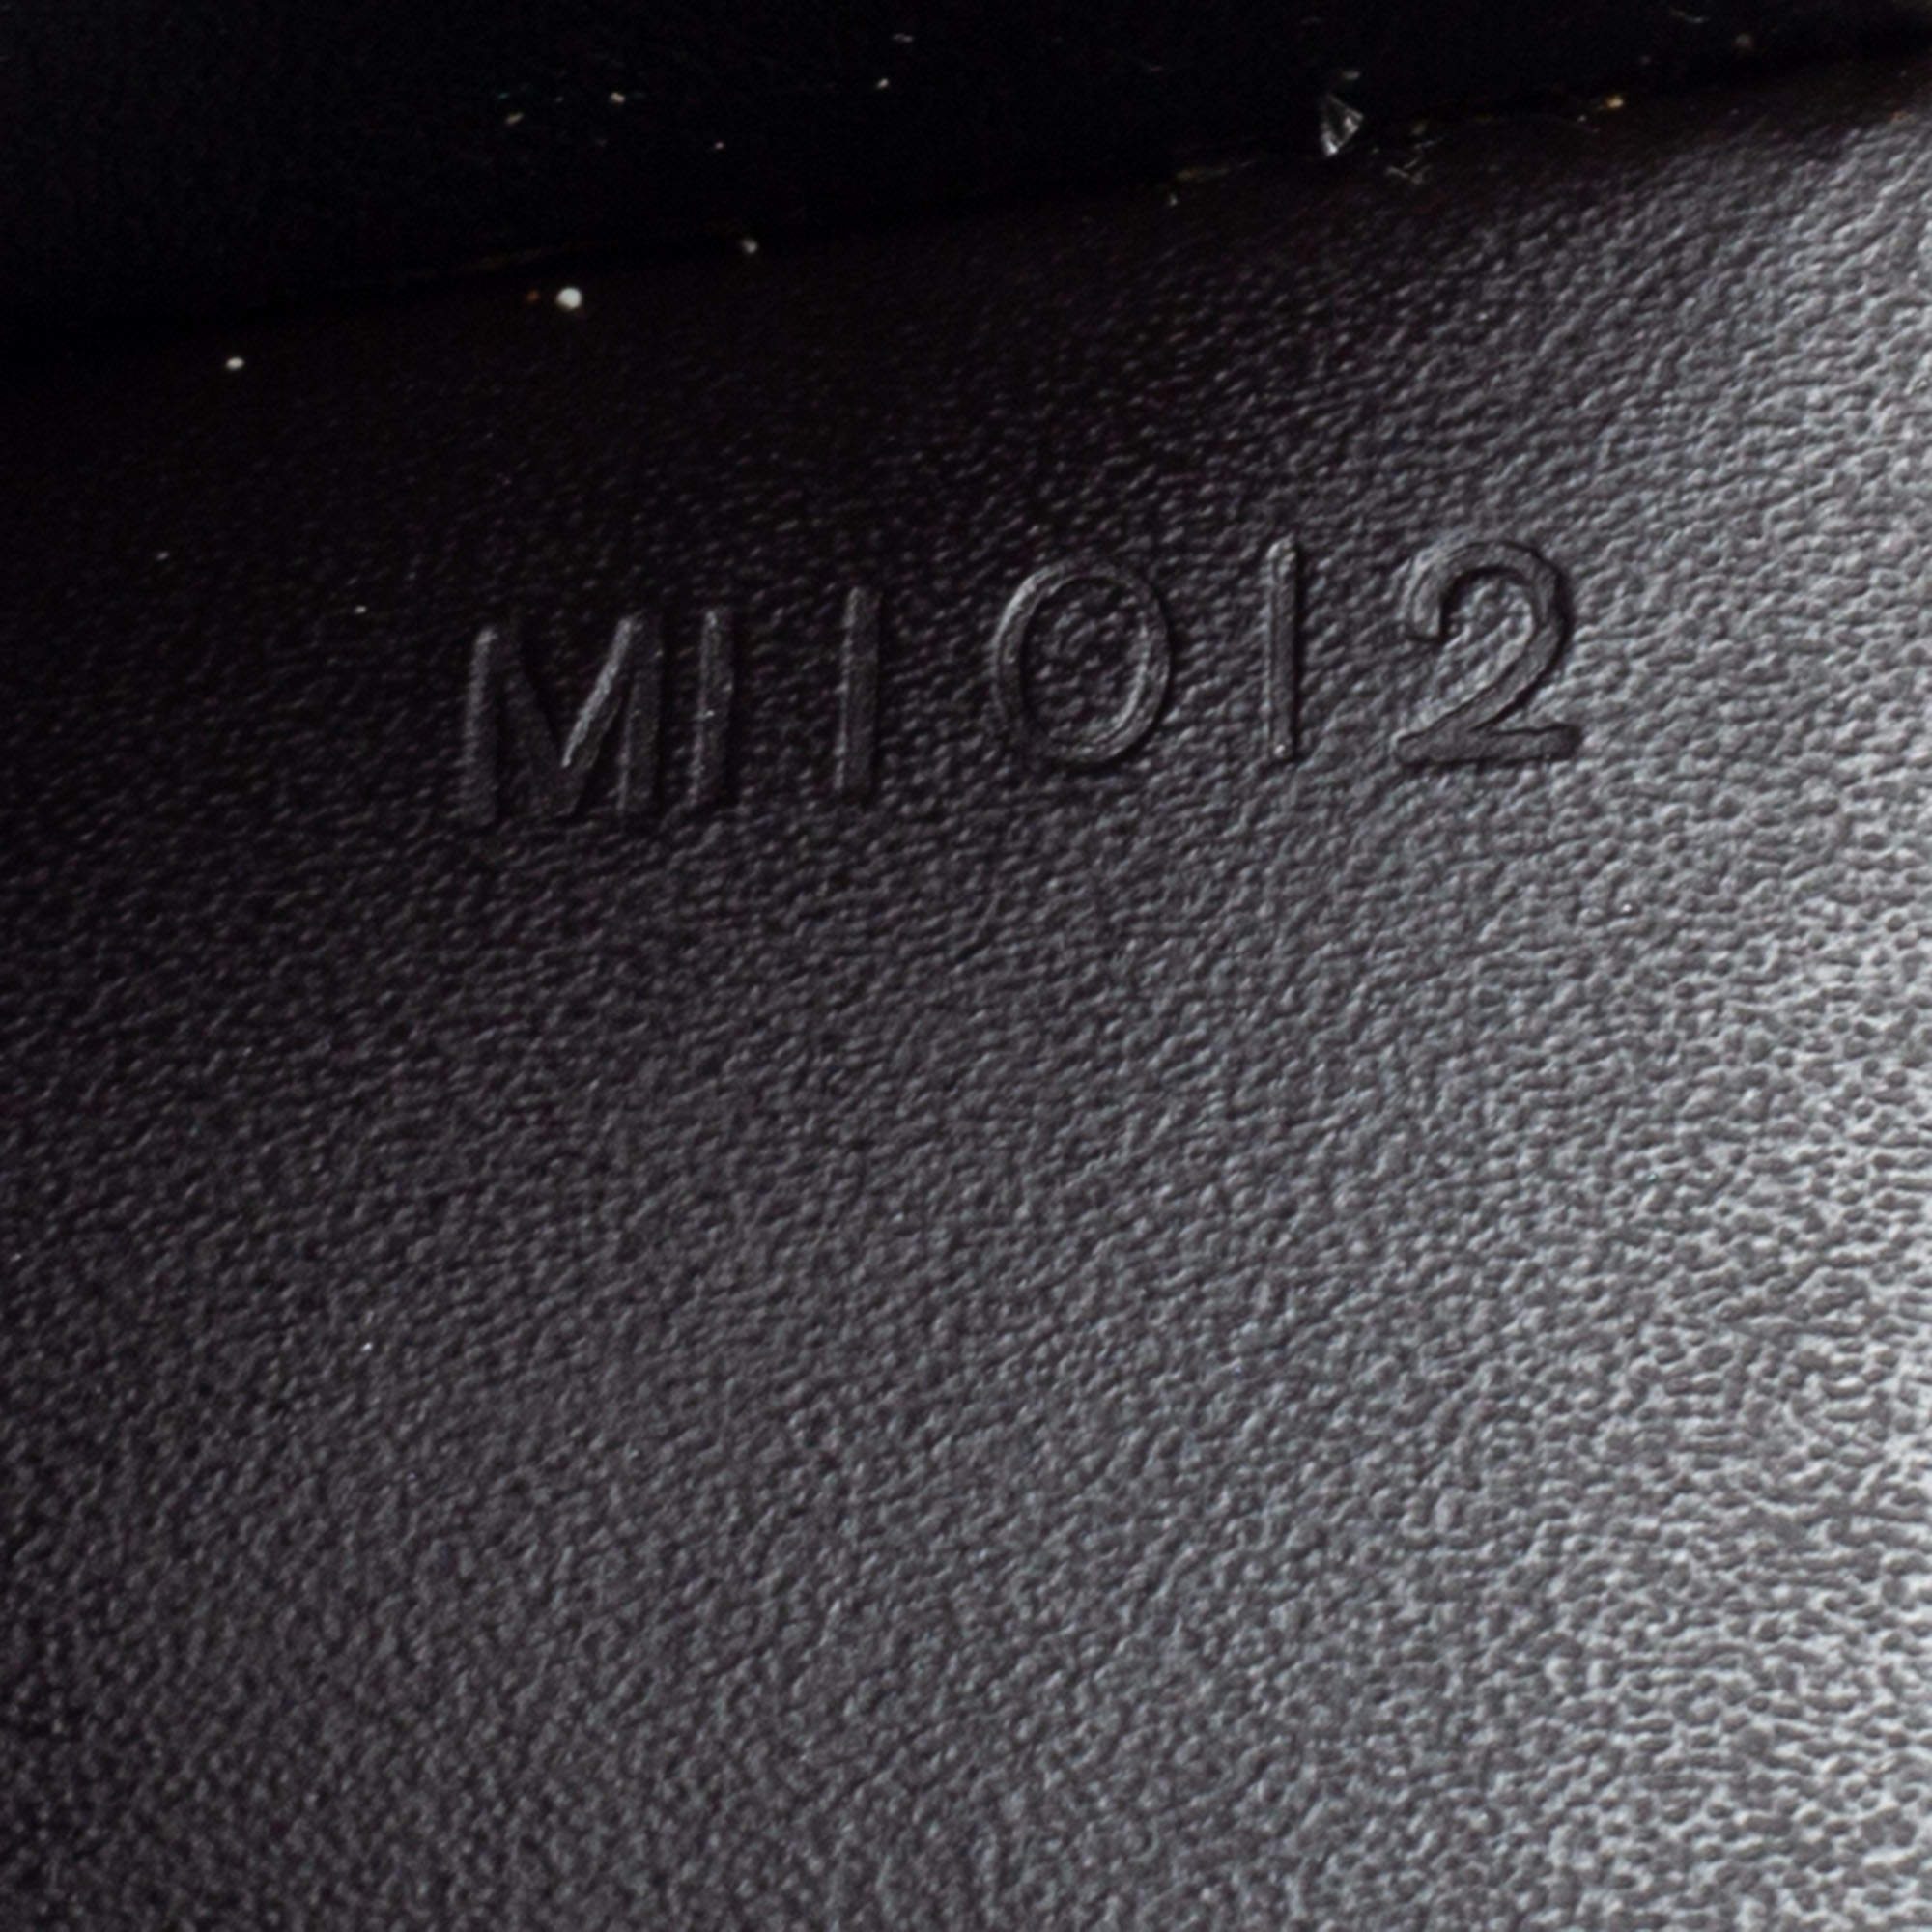 Louis Vuitton Embossed Wallet - 19 For Sale on 1stDibs  black embossed  louis vuitton wallet, lv embossed wallet, lv black embossed wallet